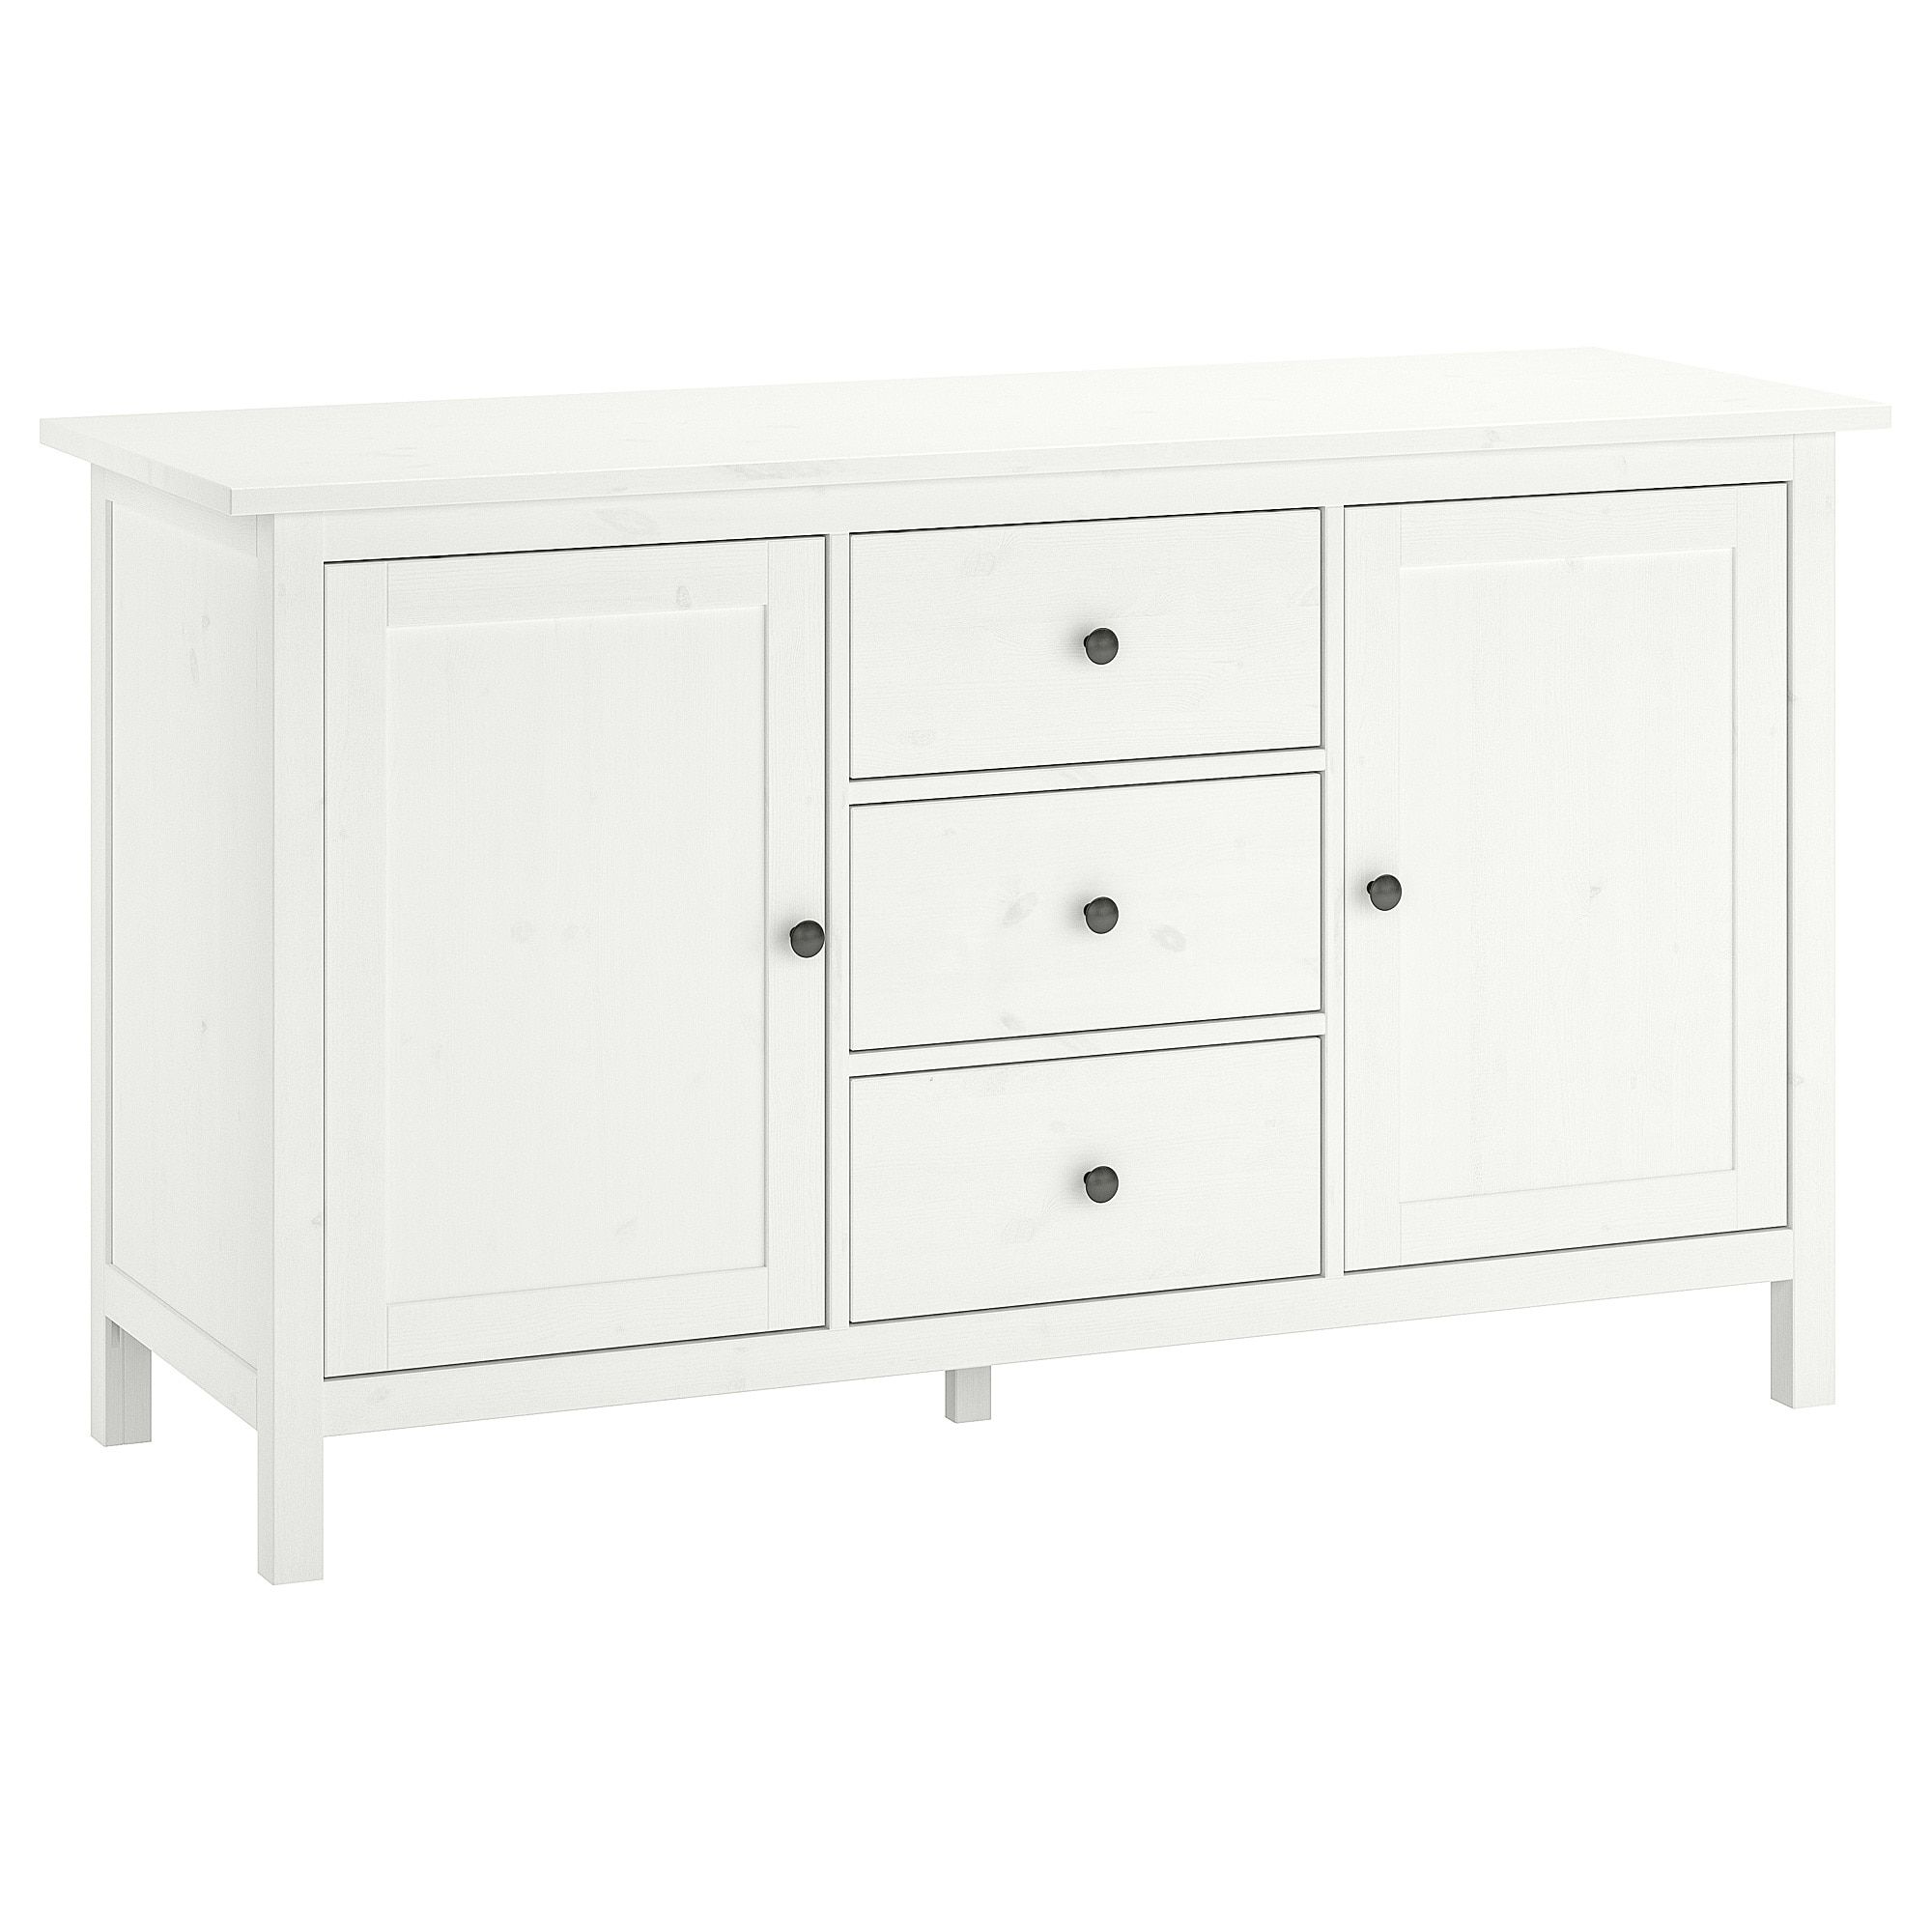 Hemnes Sideboard, White Stain Intended For North York Sideboards (View 10 of 20)